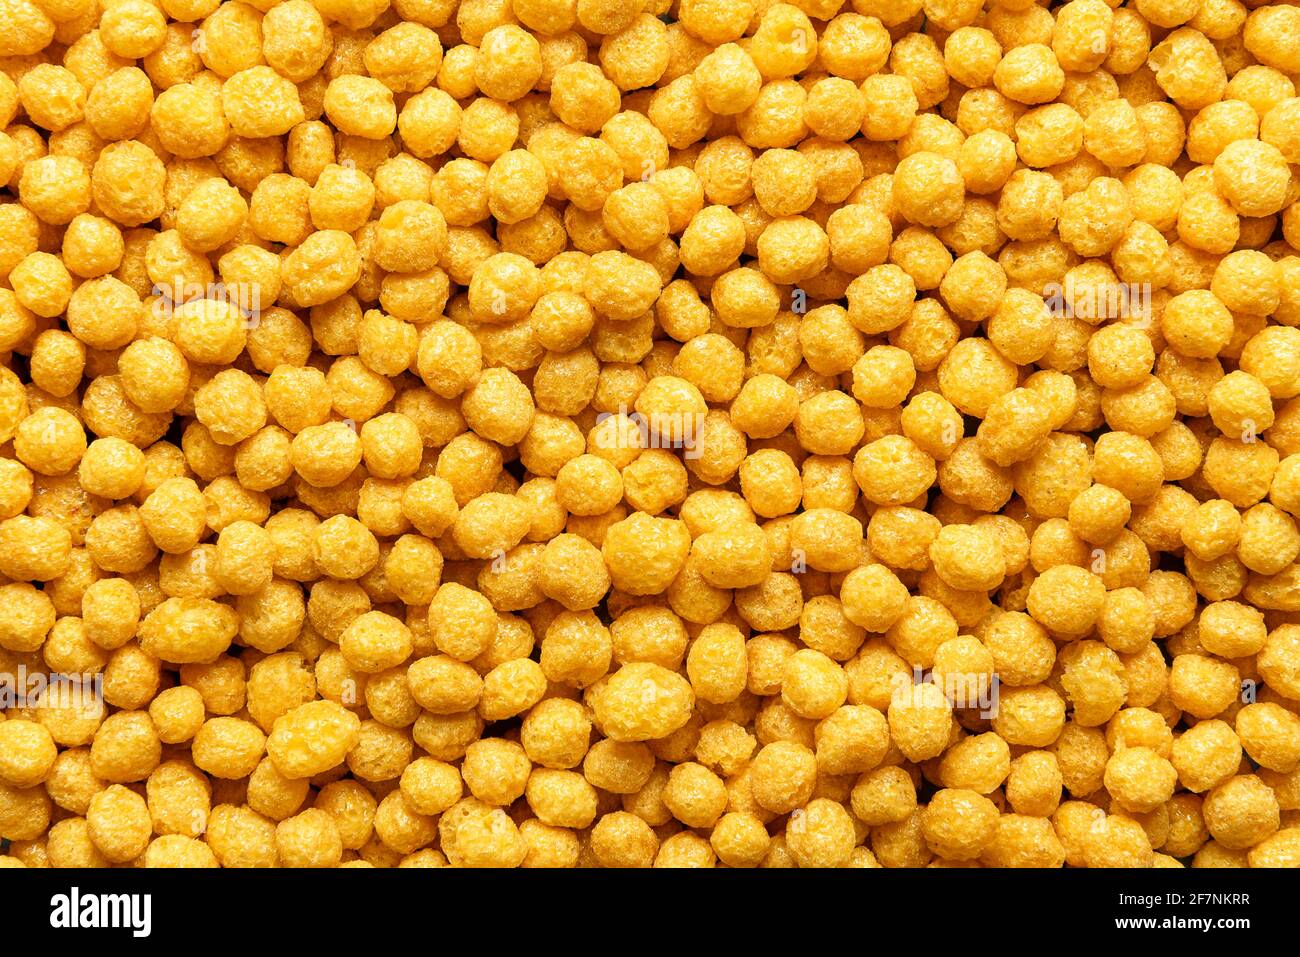 Honey pops breakfast cereals background, flat lay. Full frame with  cornflakes. Delicious corn cereal balls. Macro image with yellow round  cereals Stock Photo - Alamy